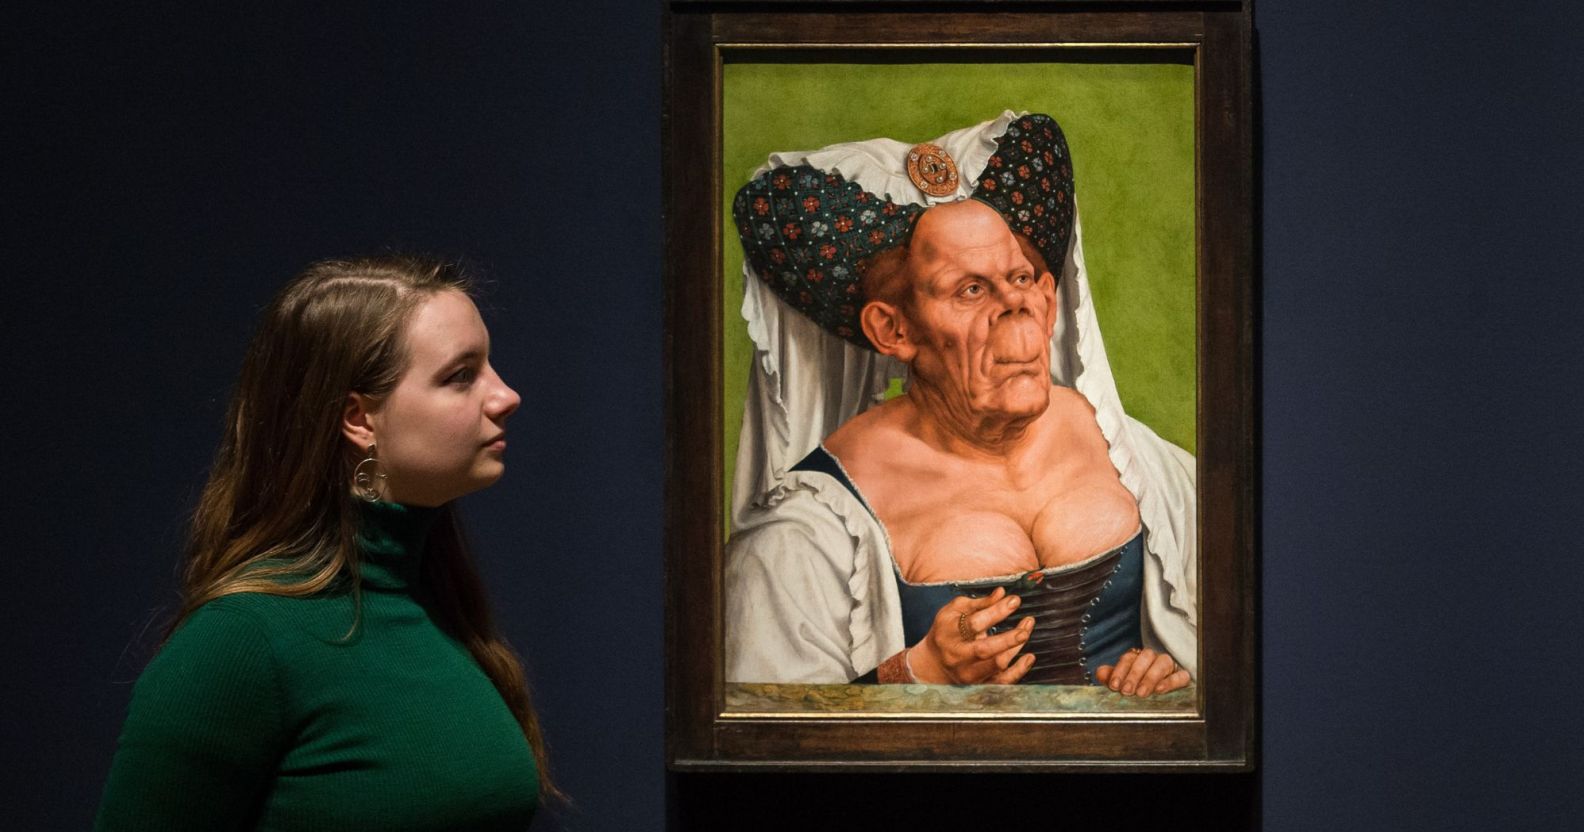 An Old Woman: Renaissance Painting May Actually Be A Man